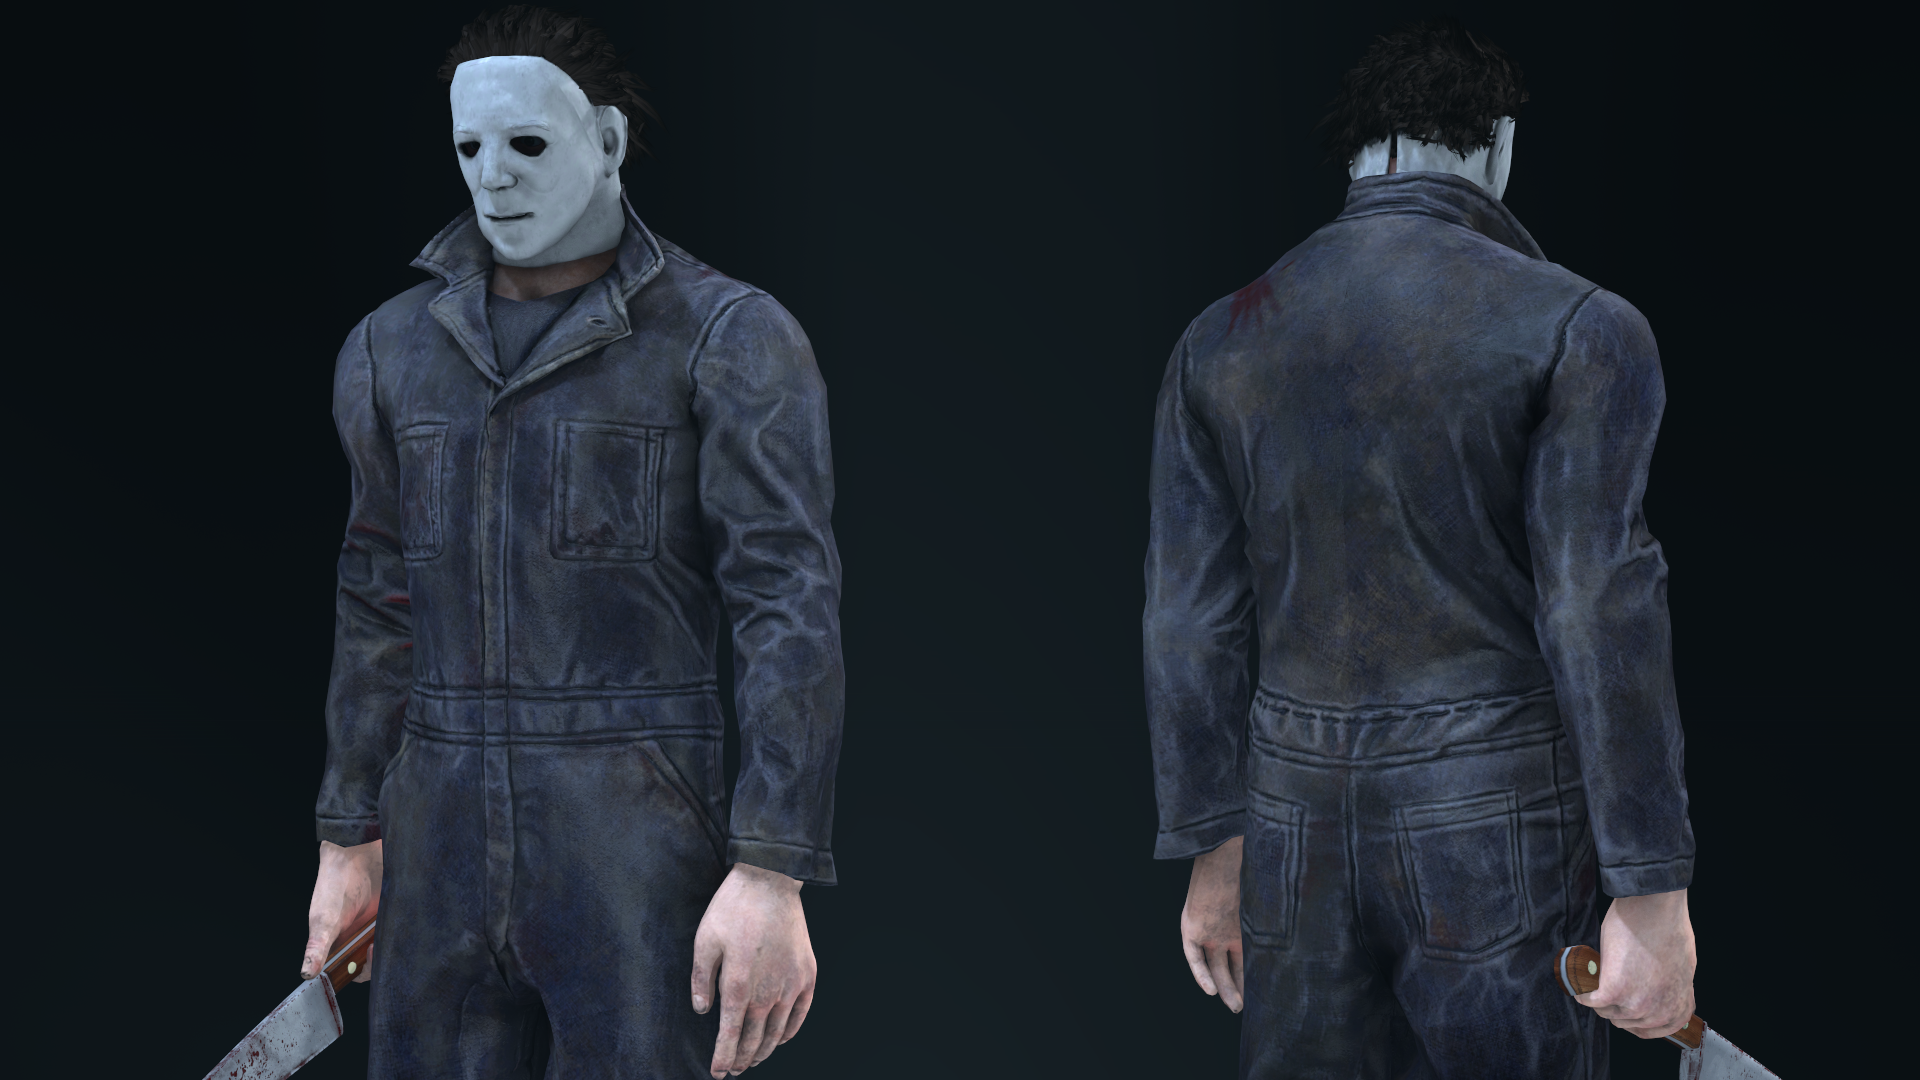 Steam Workshop Michael Myers Dead By Daylight Weapons Are Included